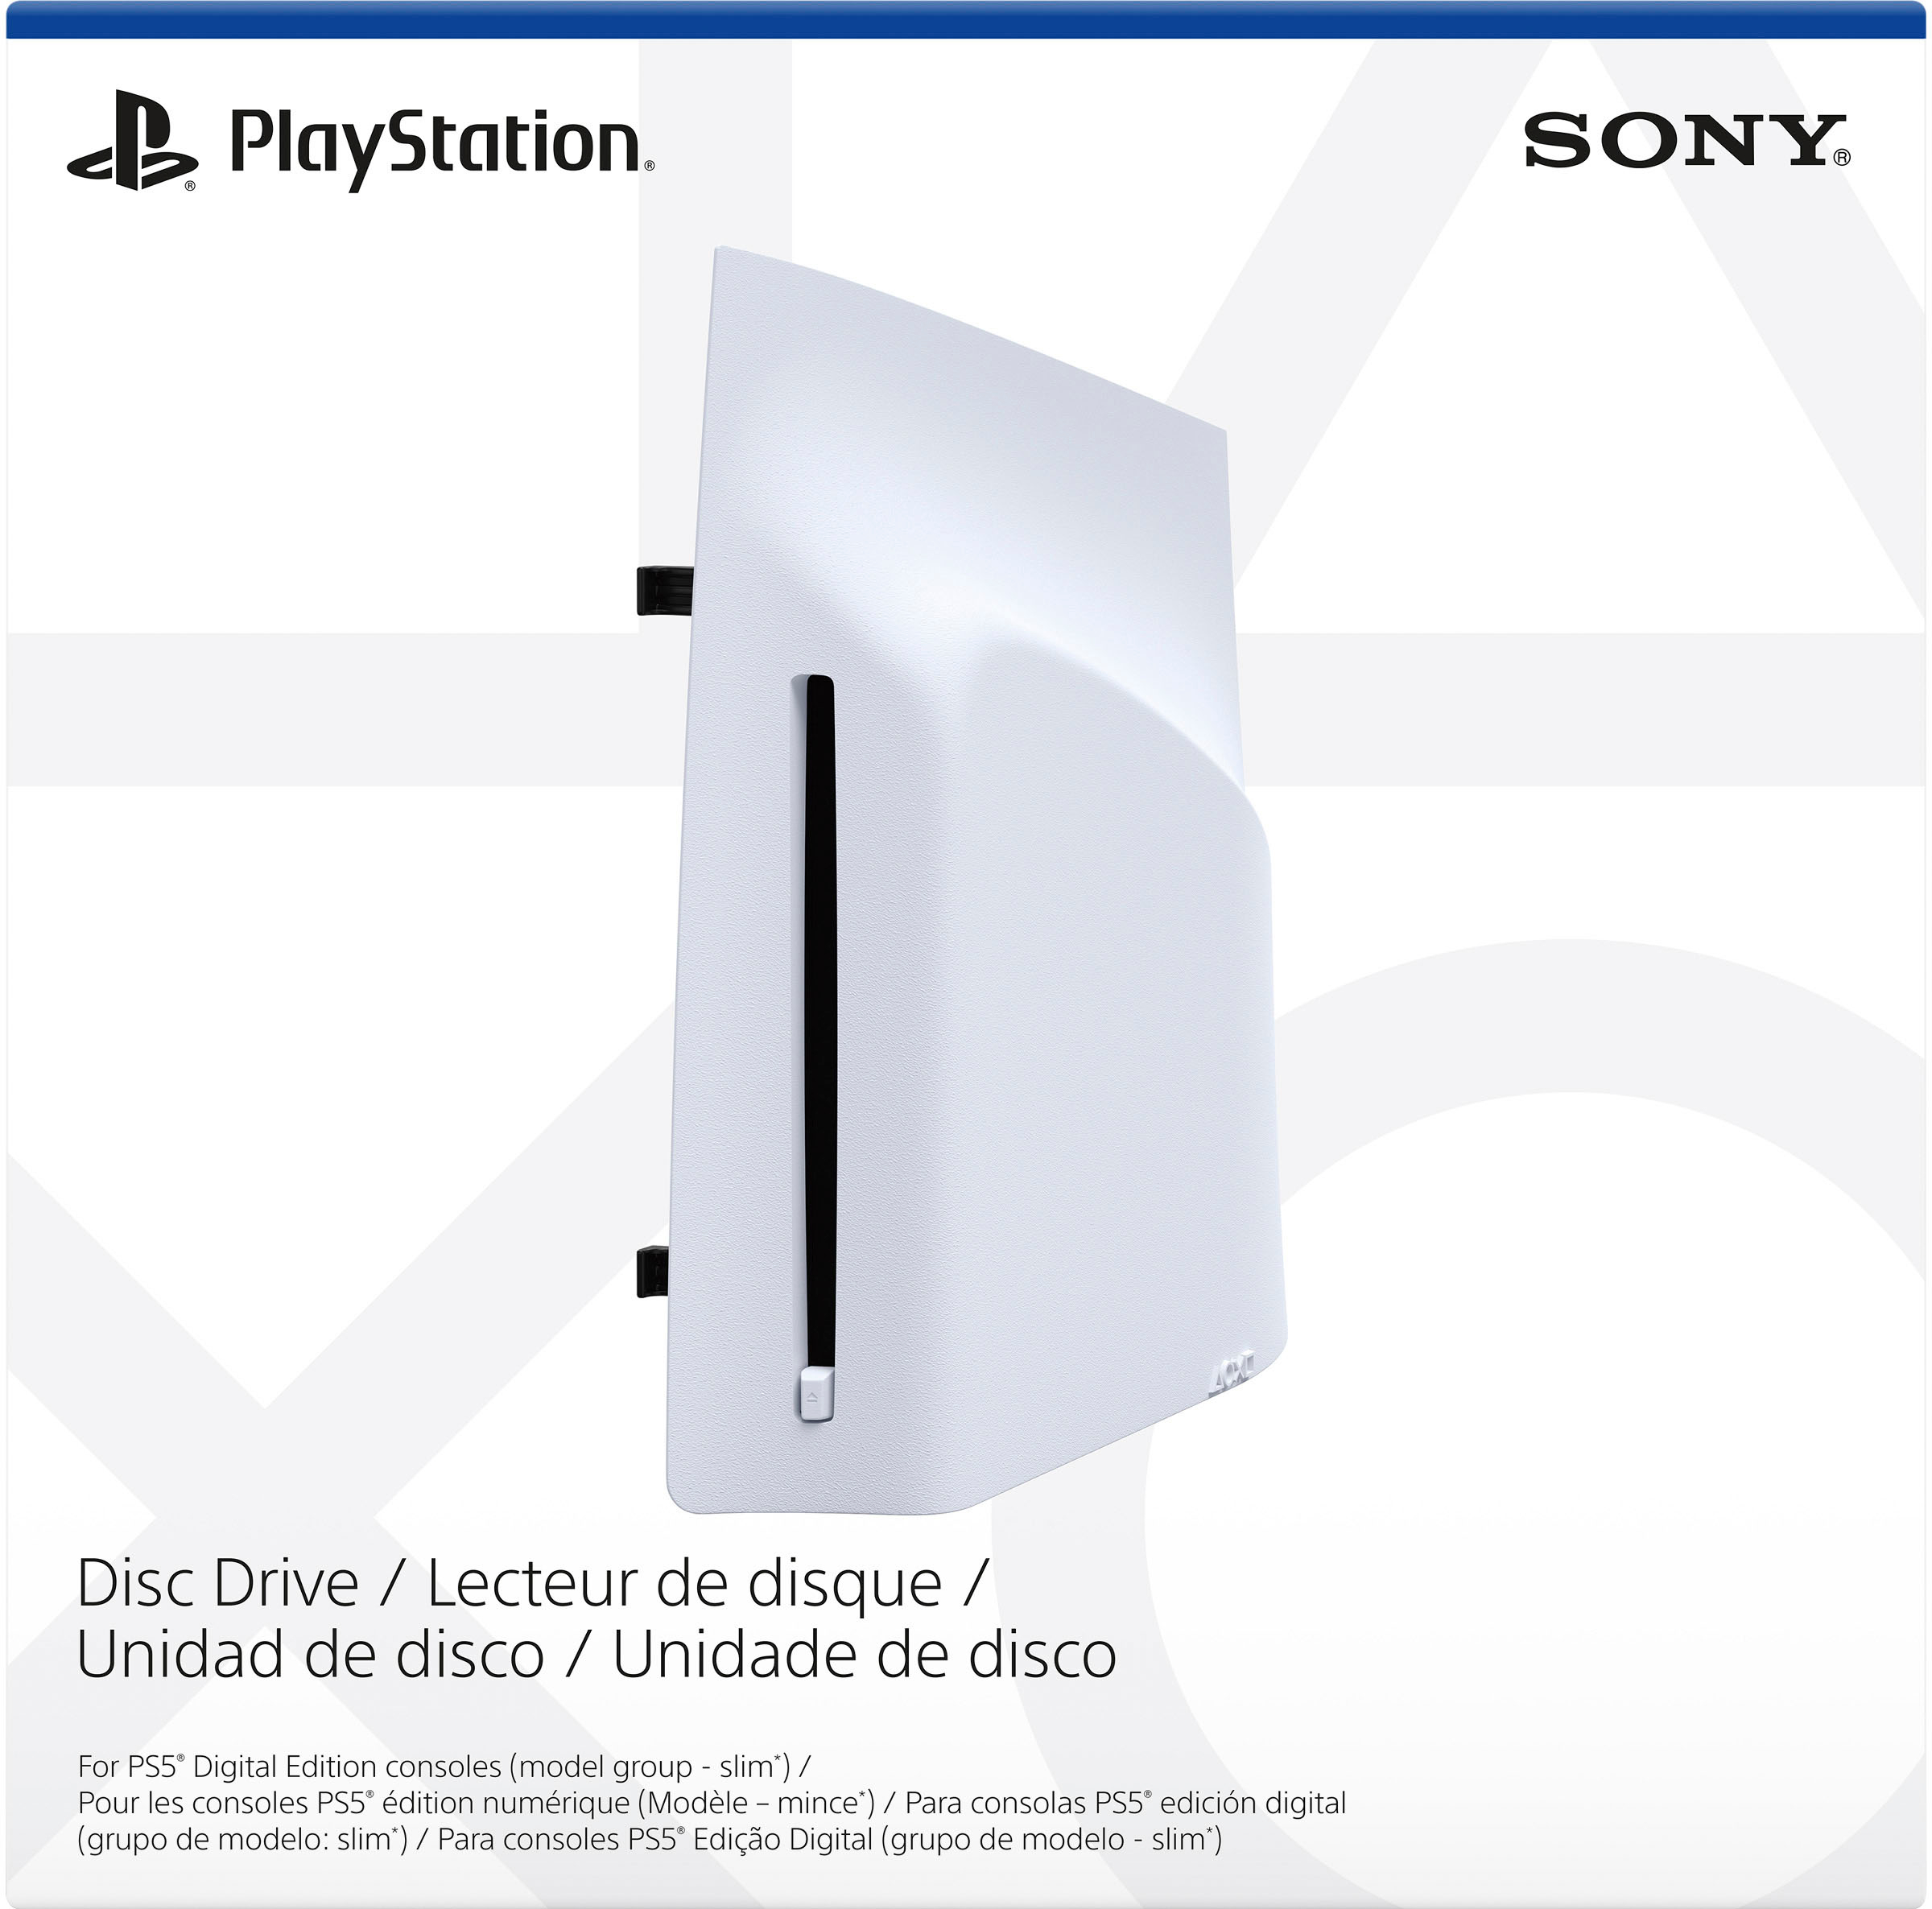 Disc Drive for PS5 Digital Edition Consoles (Slim)